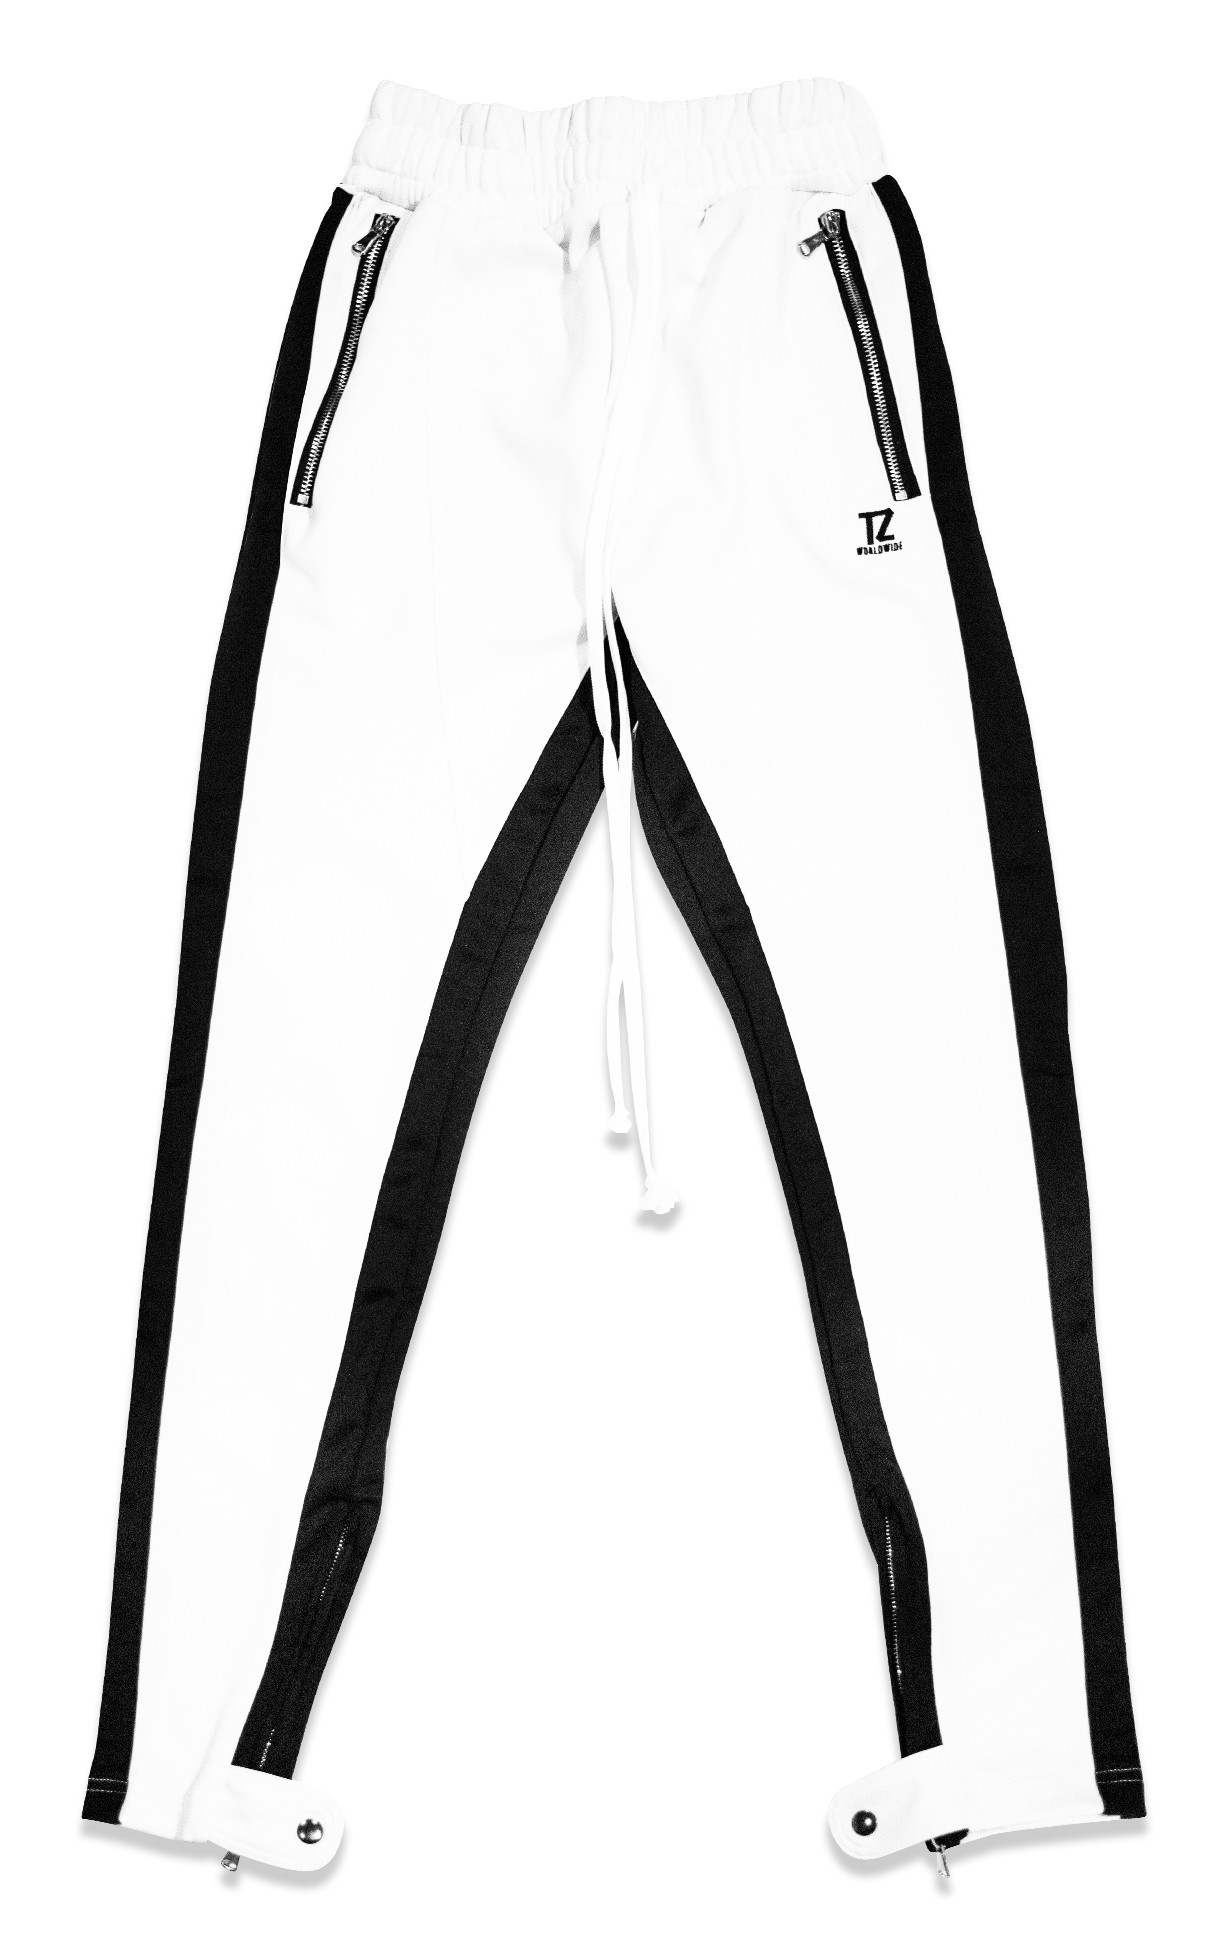 white track pants with black stripe